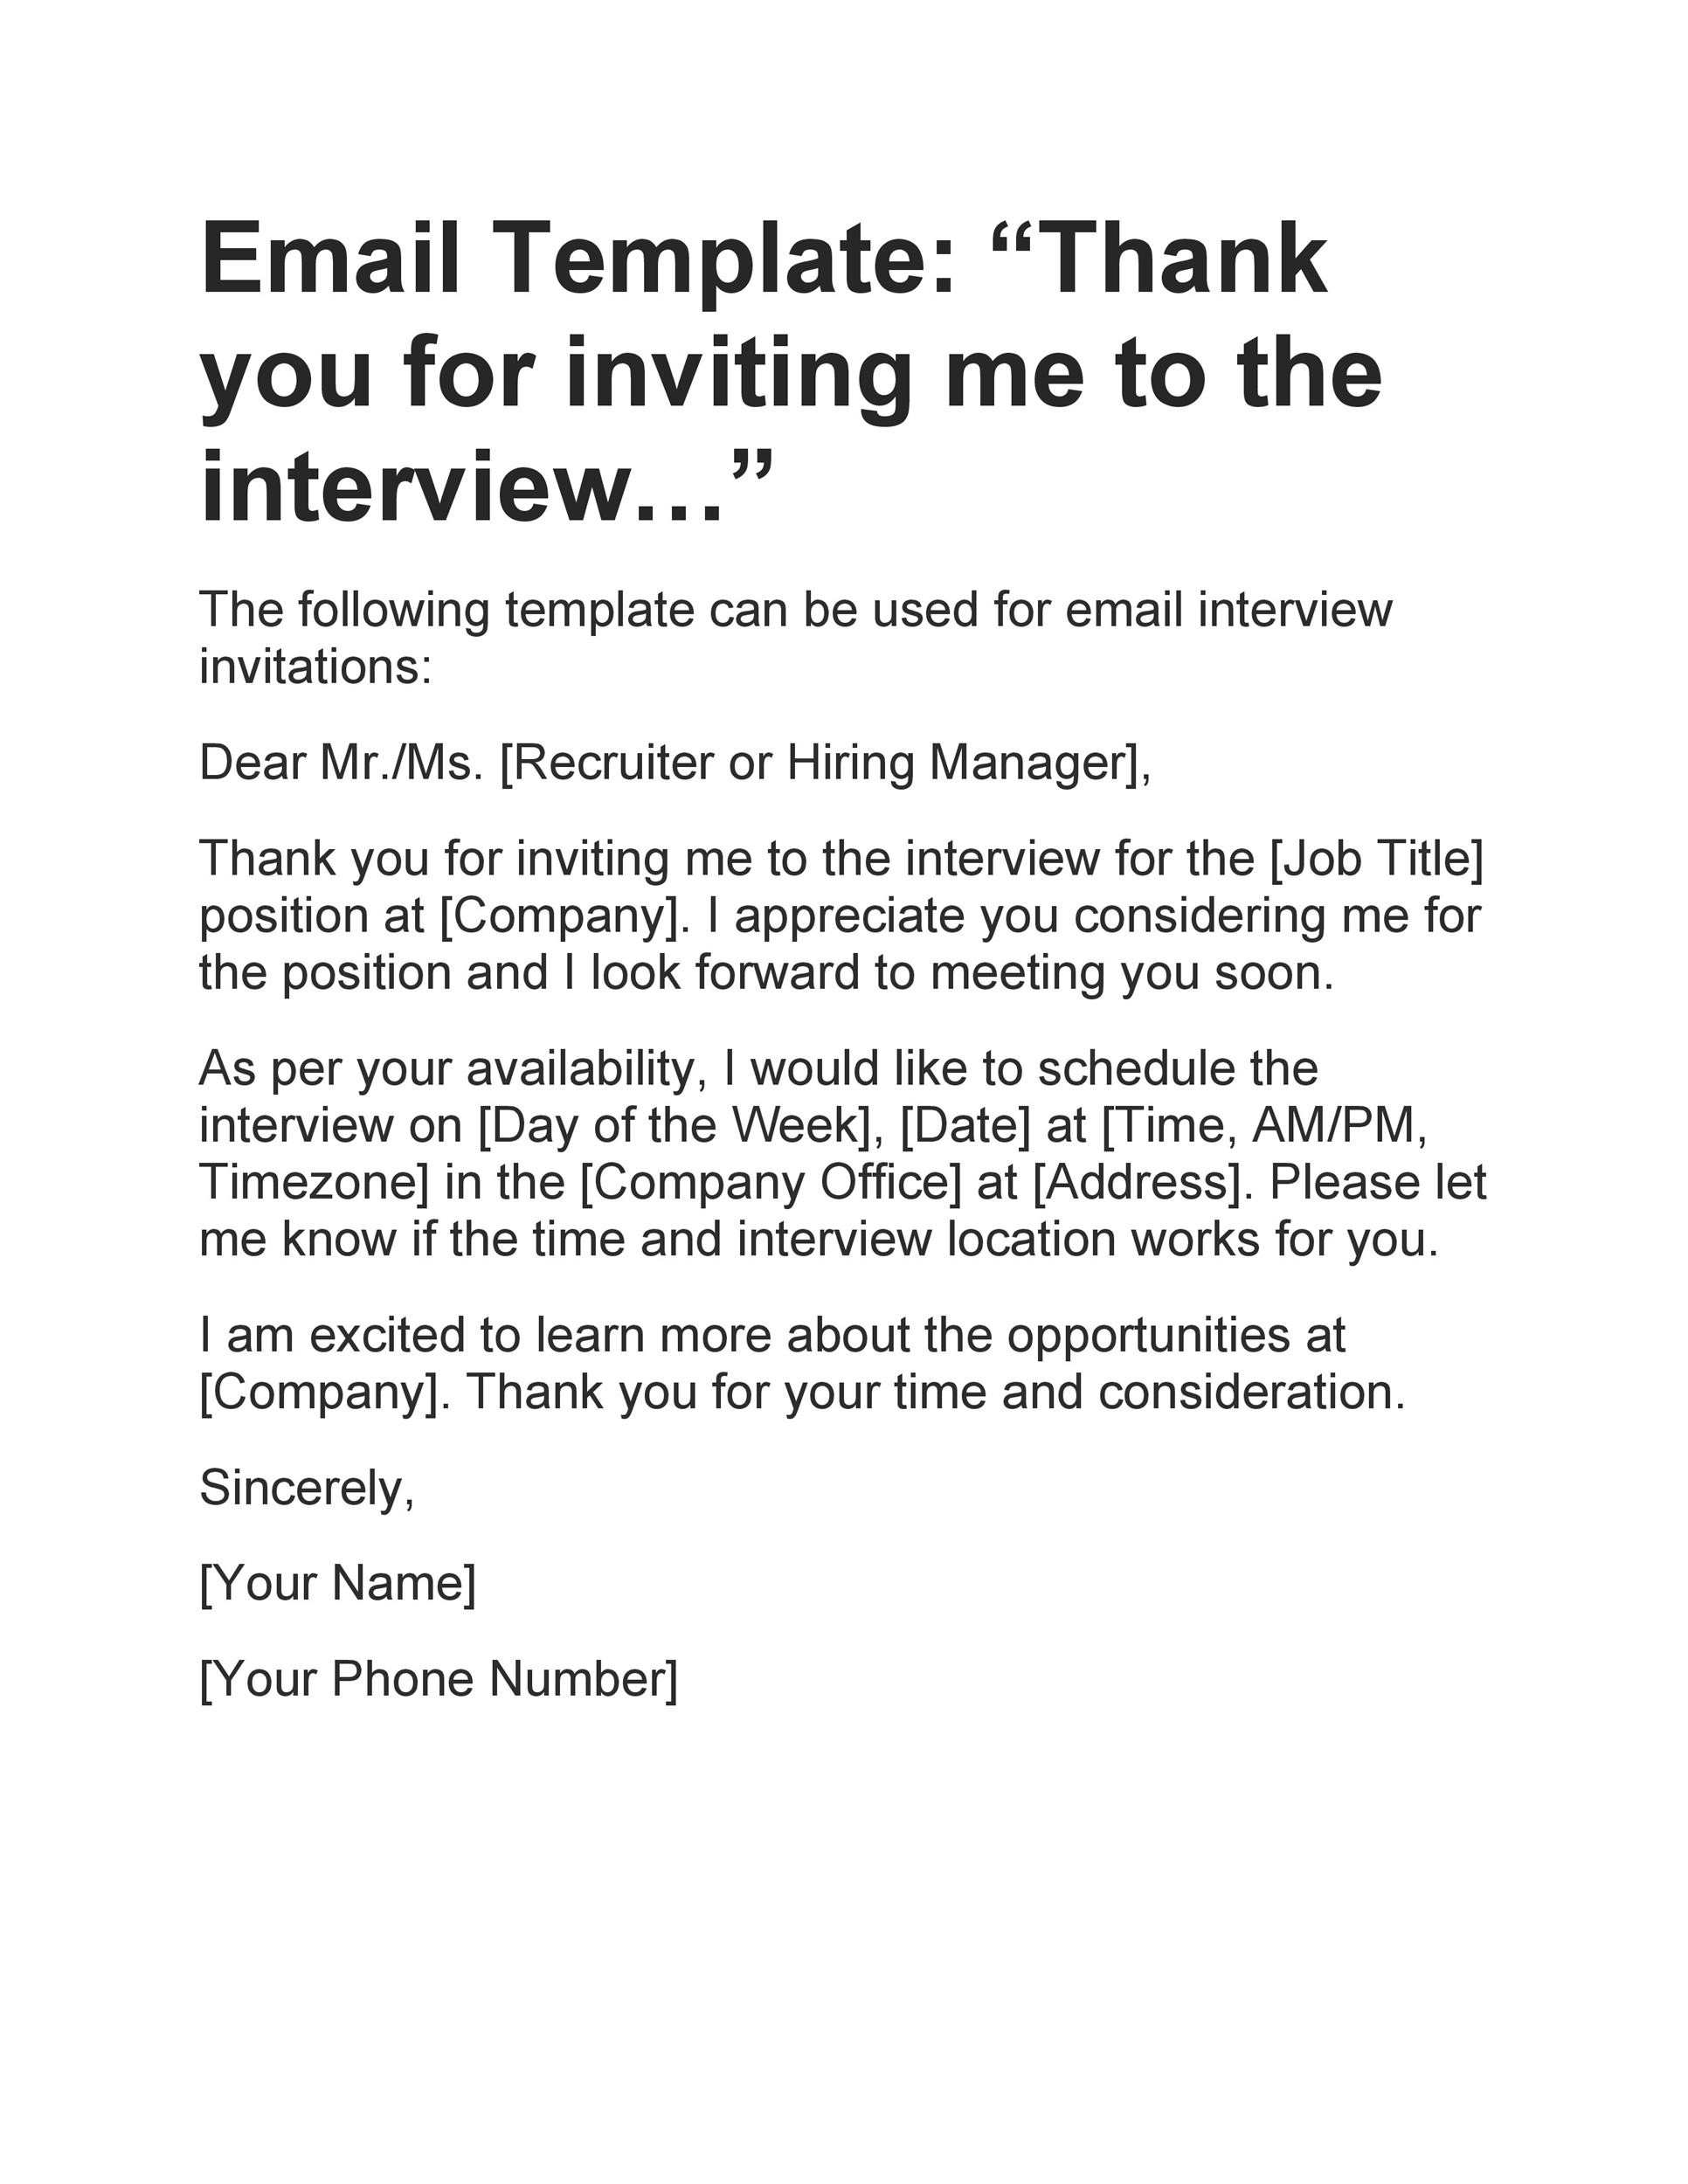 how to accept an interview invitation via email